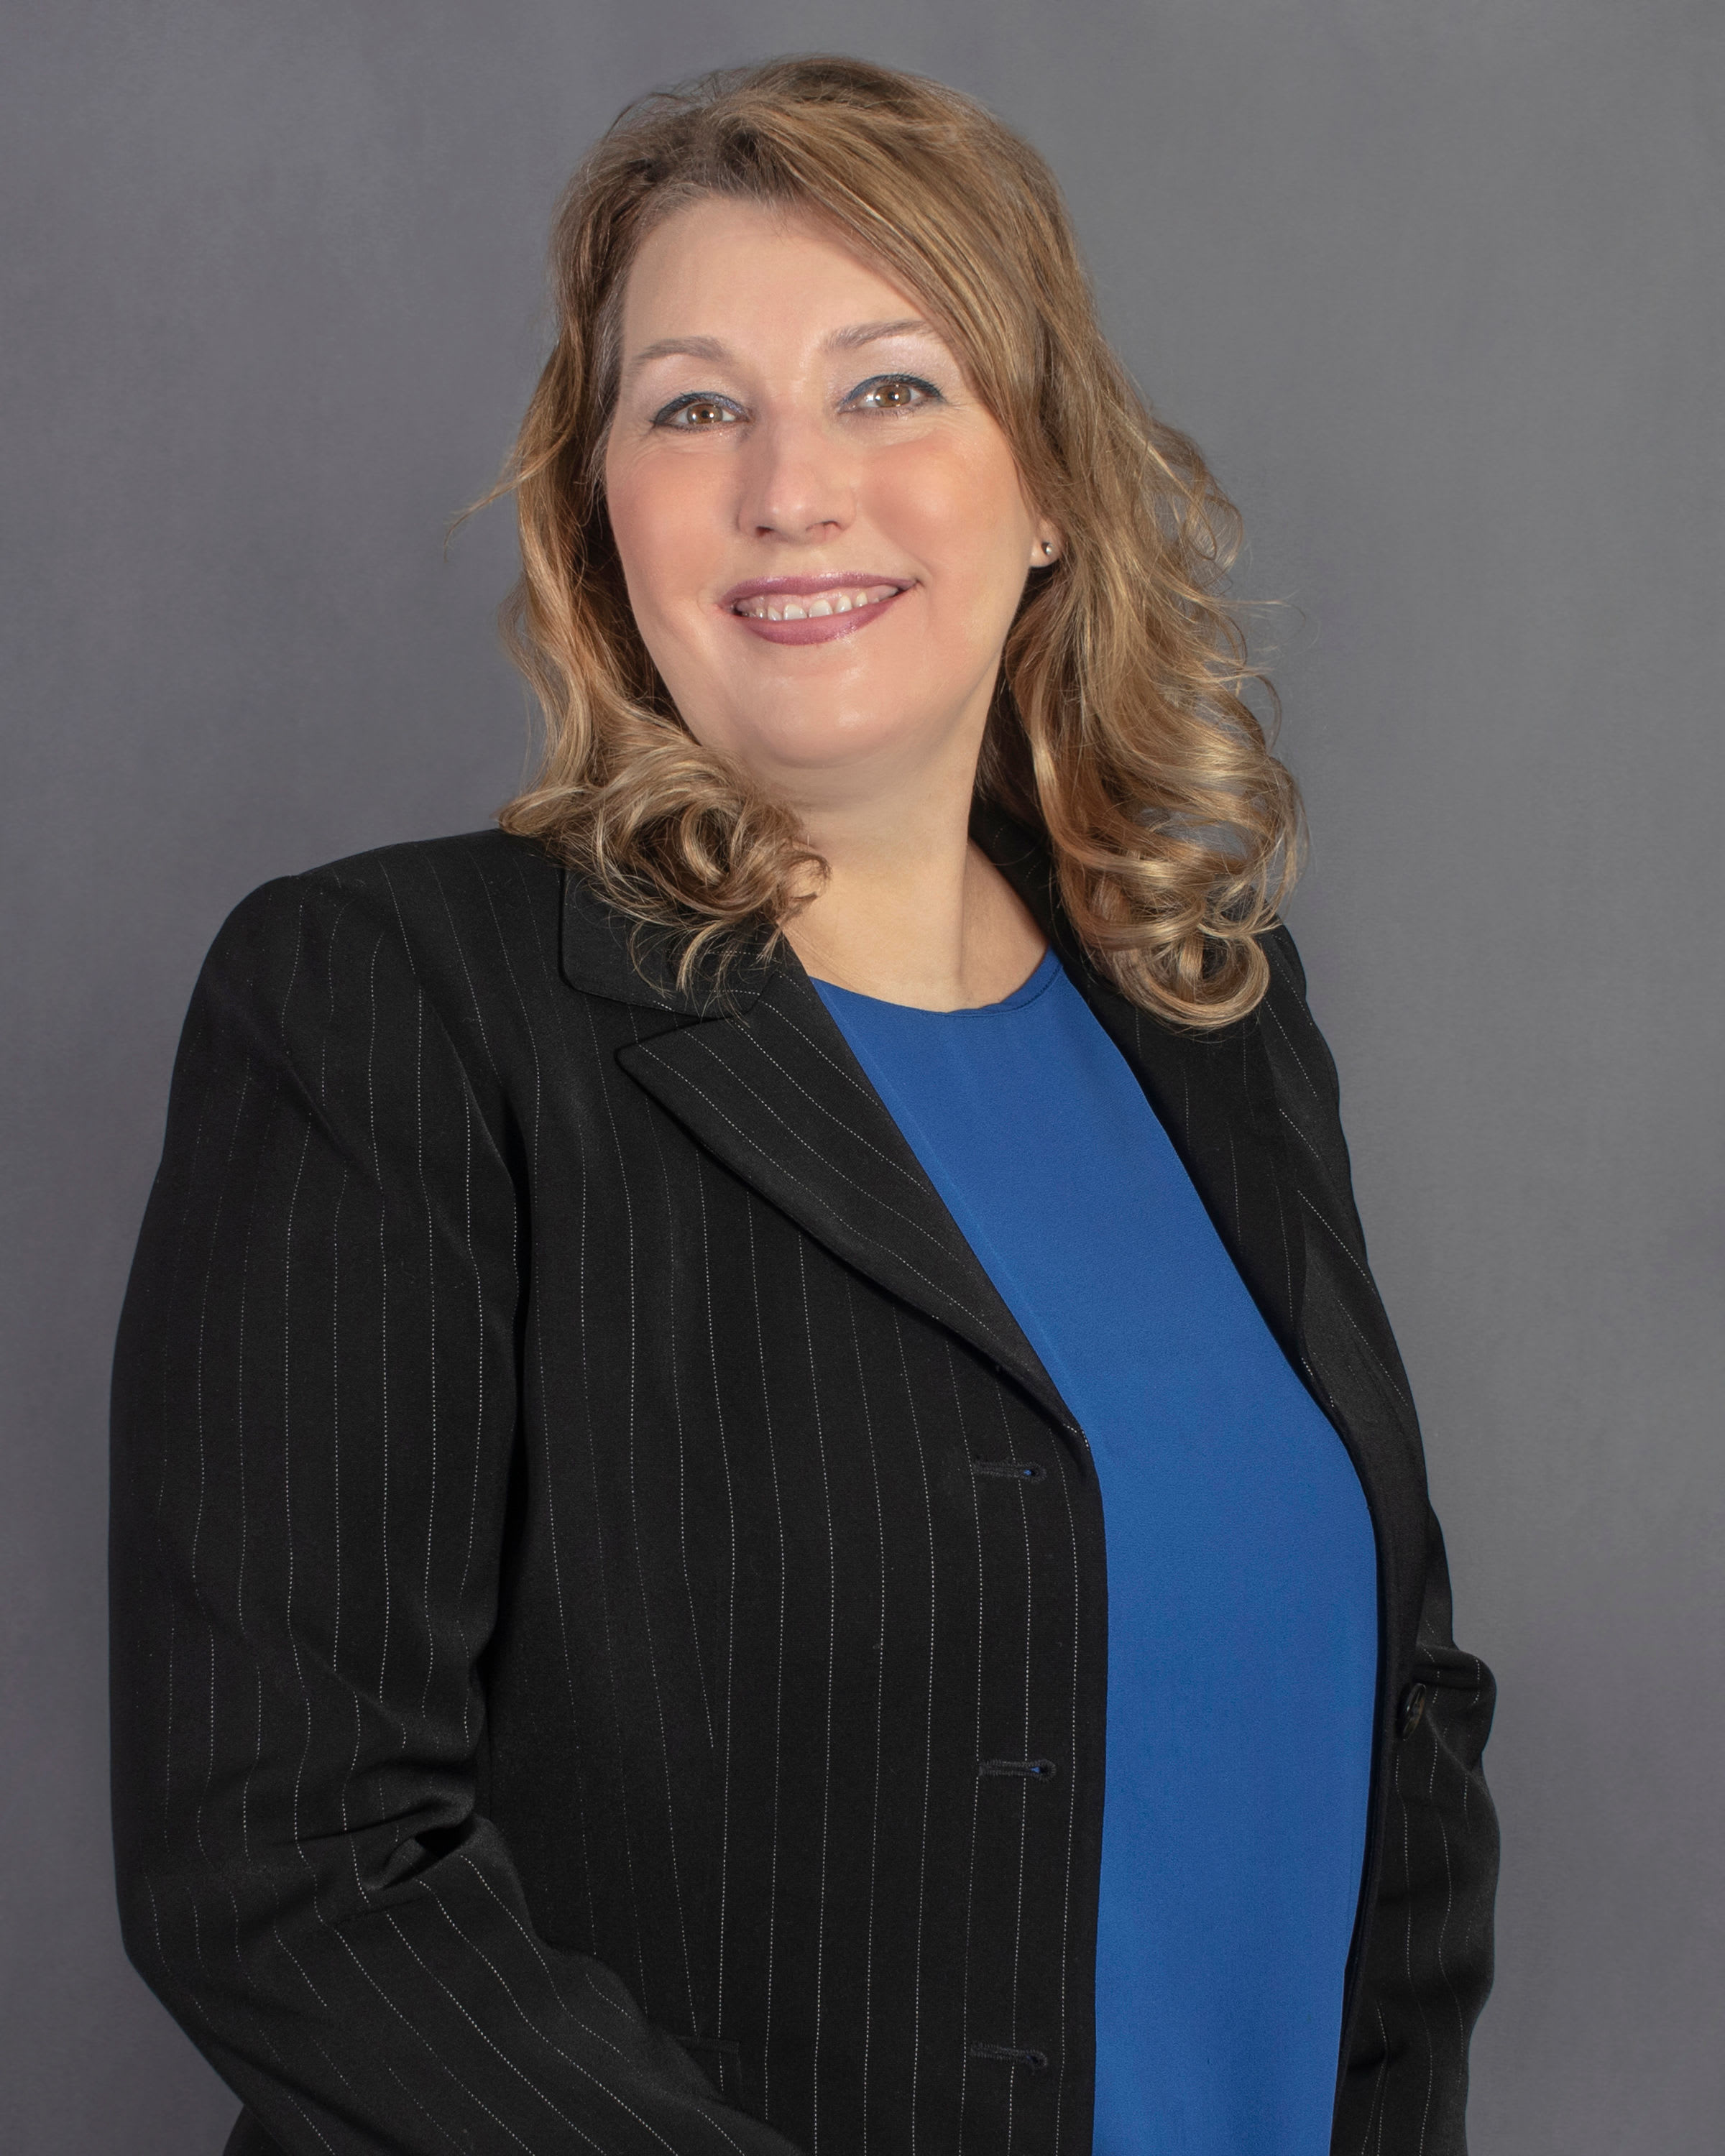 Jodi A. Brock, Sales and Marketing Director at Randall Residence of McHenry in McHenry, Illinois